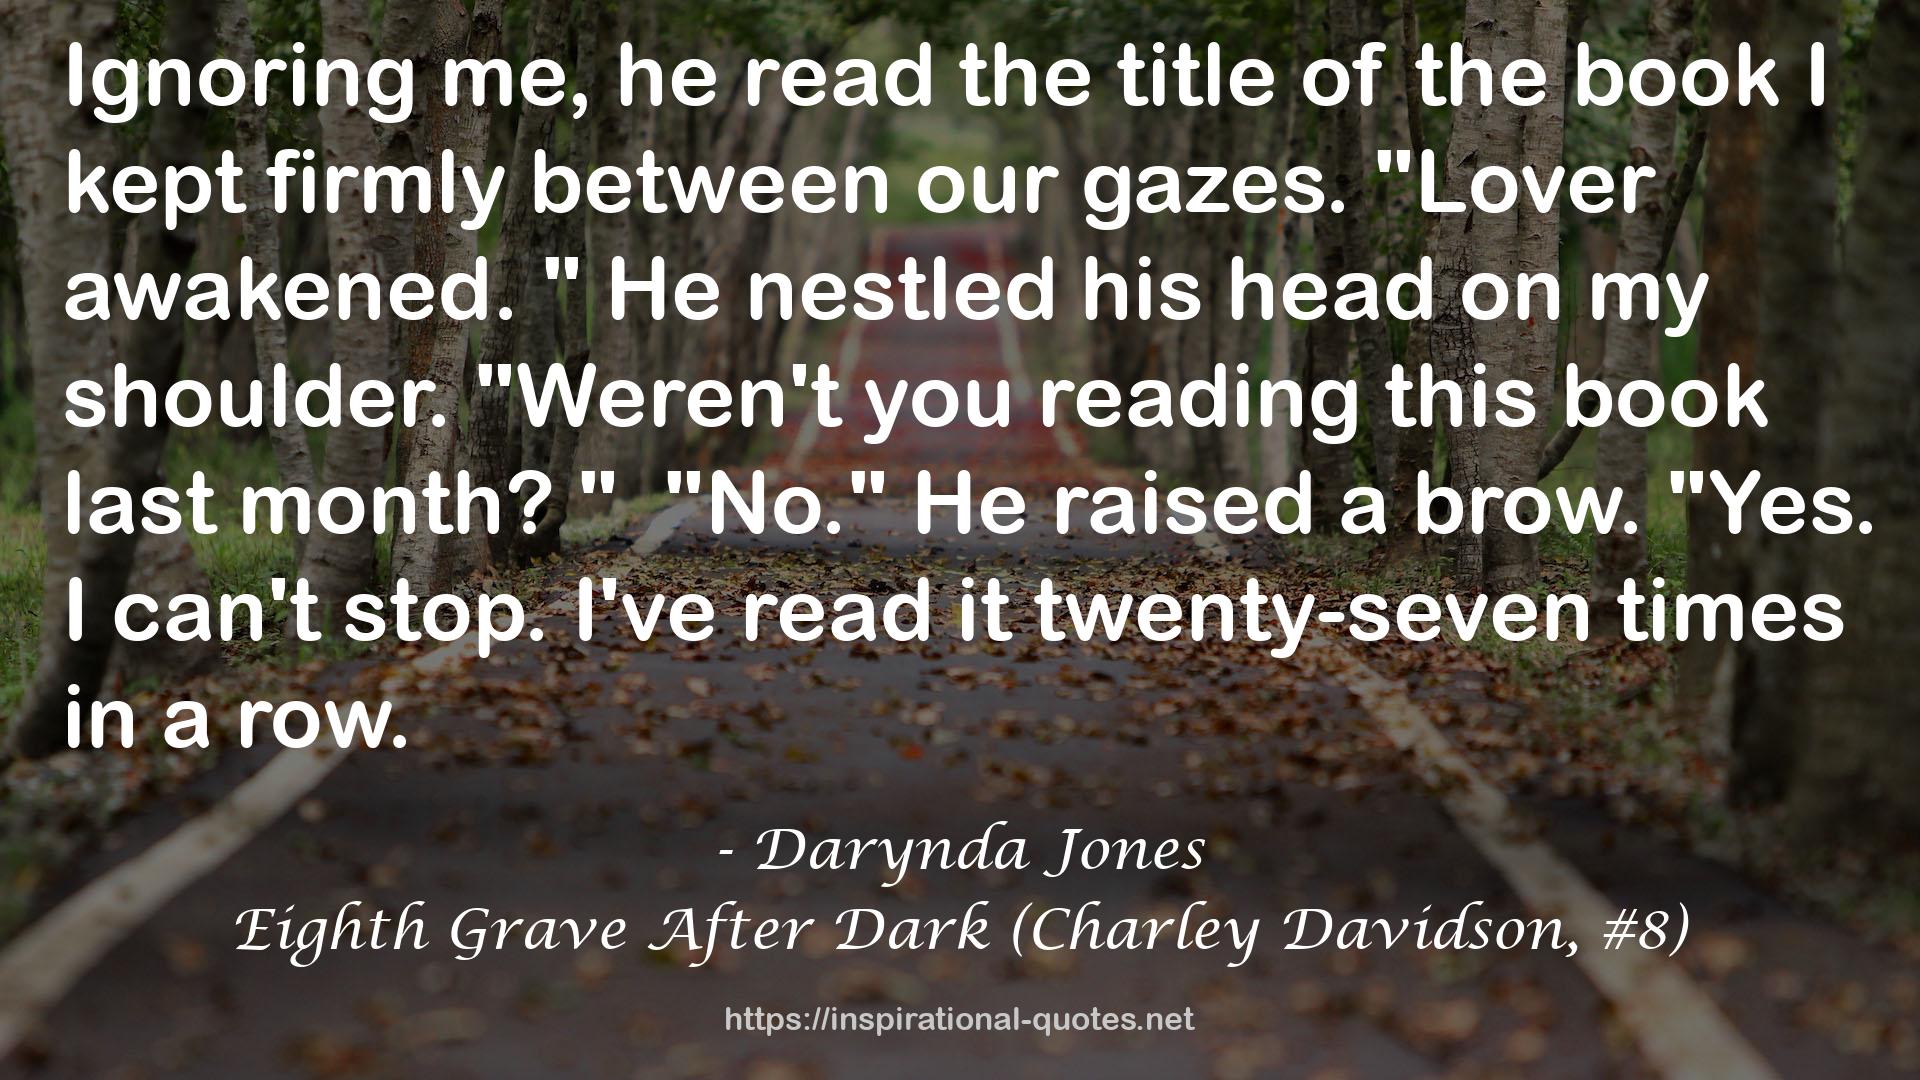 Eighth Grave After Dark (Charley Davidson, #8) QUOTES